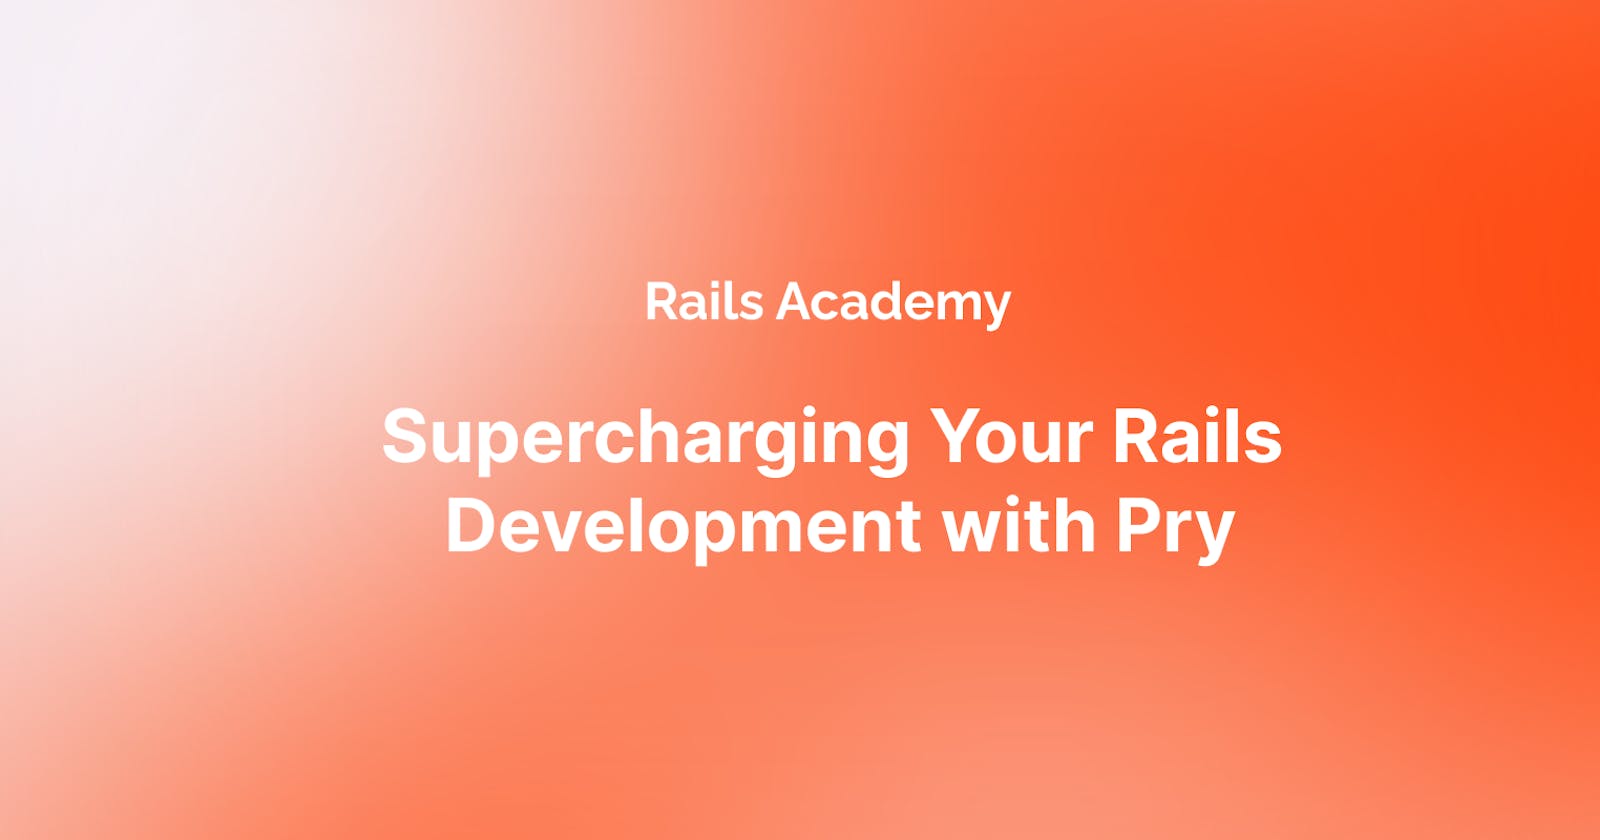 Supercharging Your Rails Development with Pry